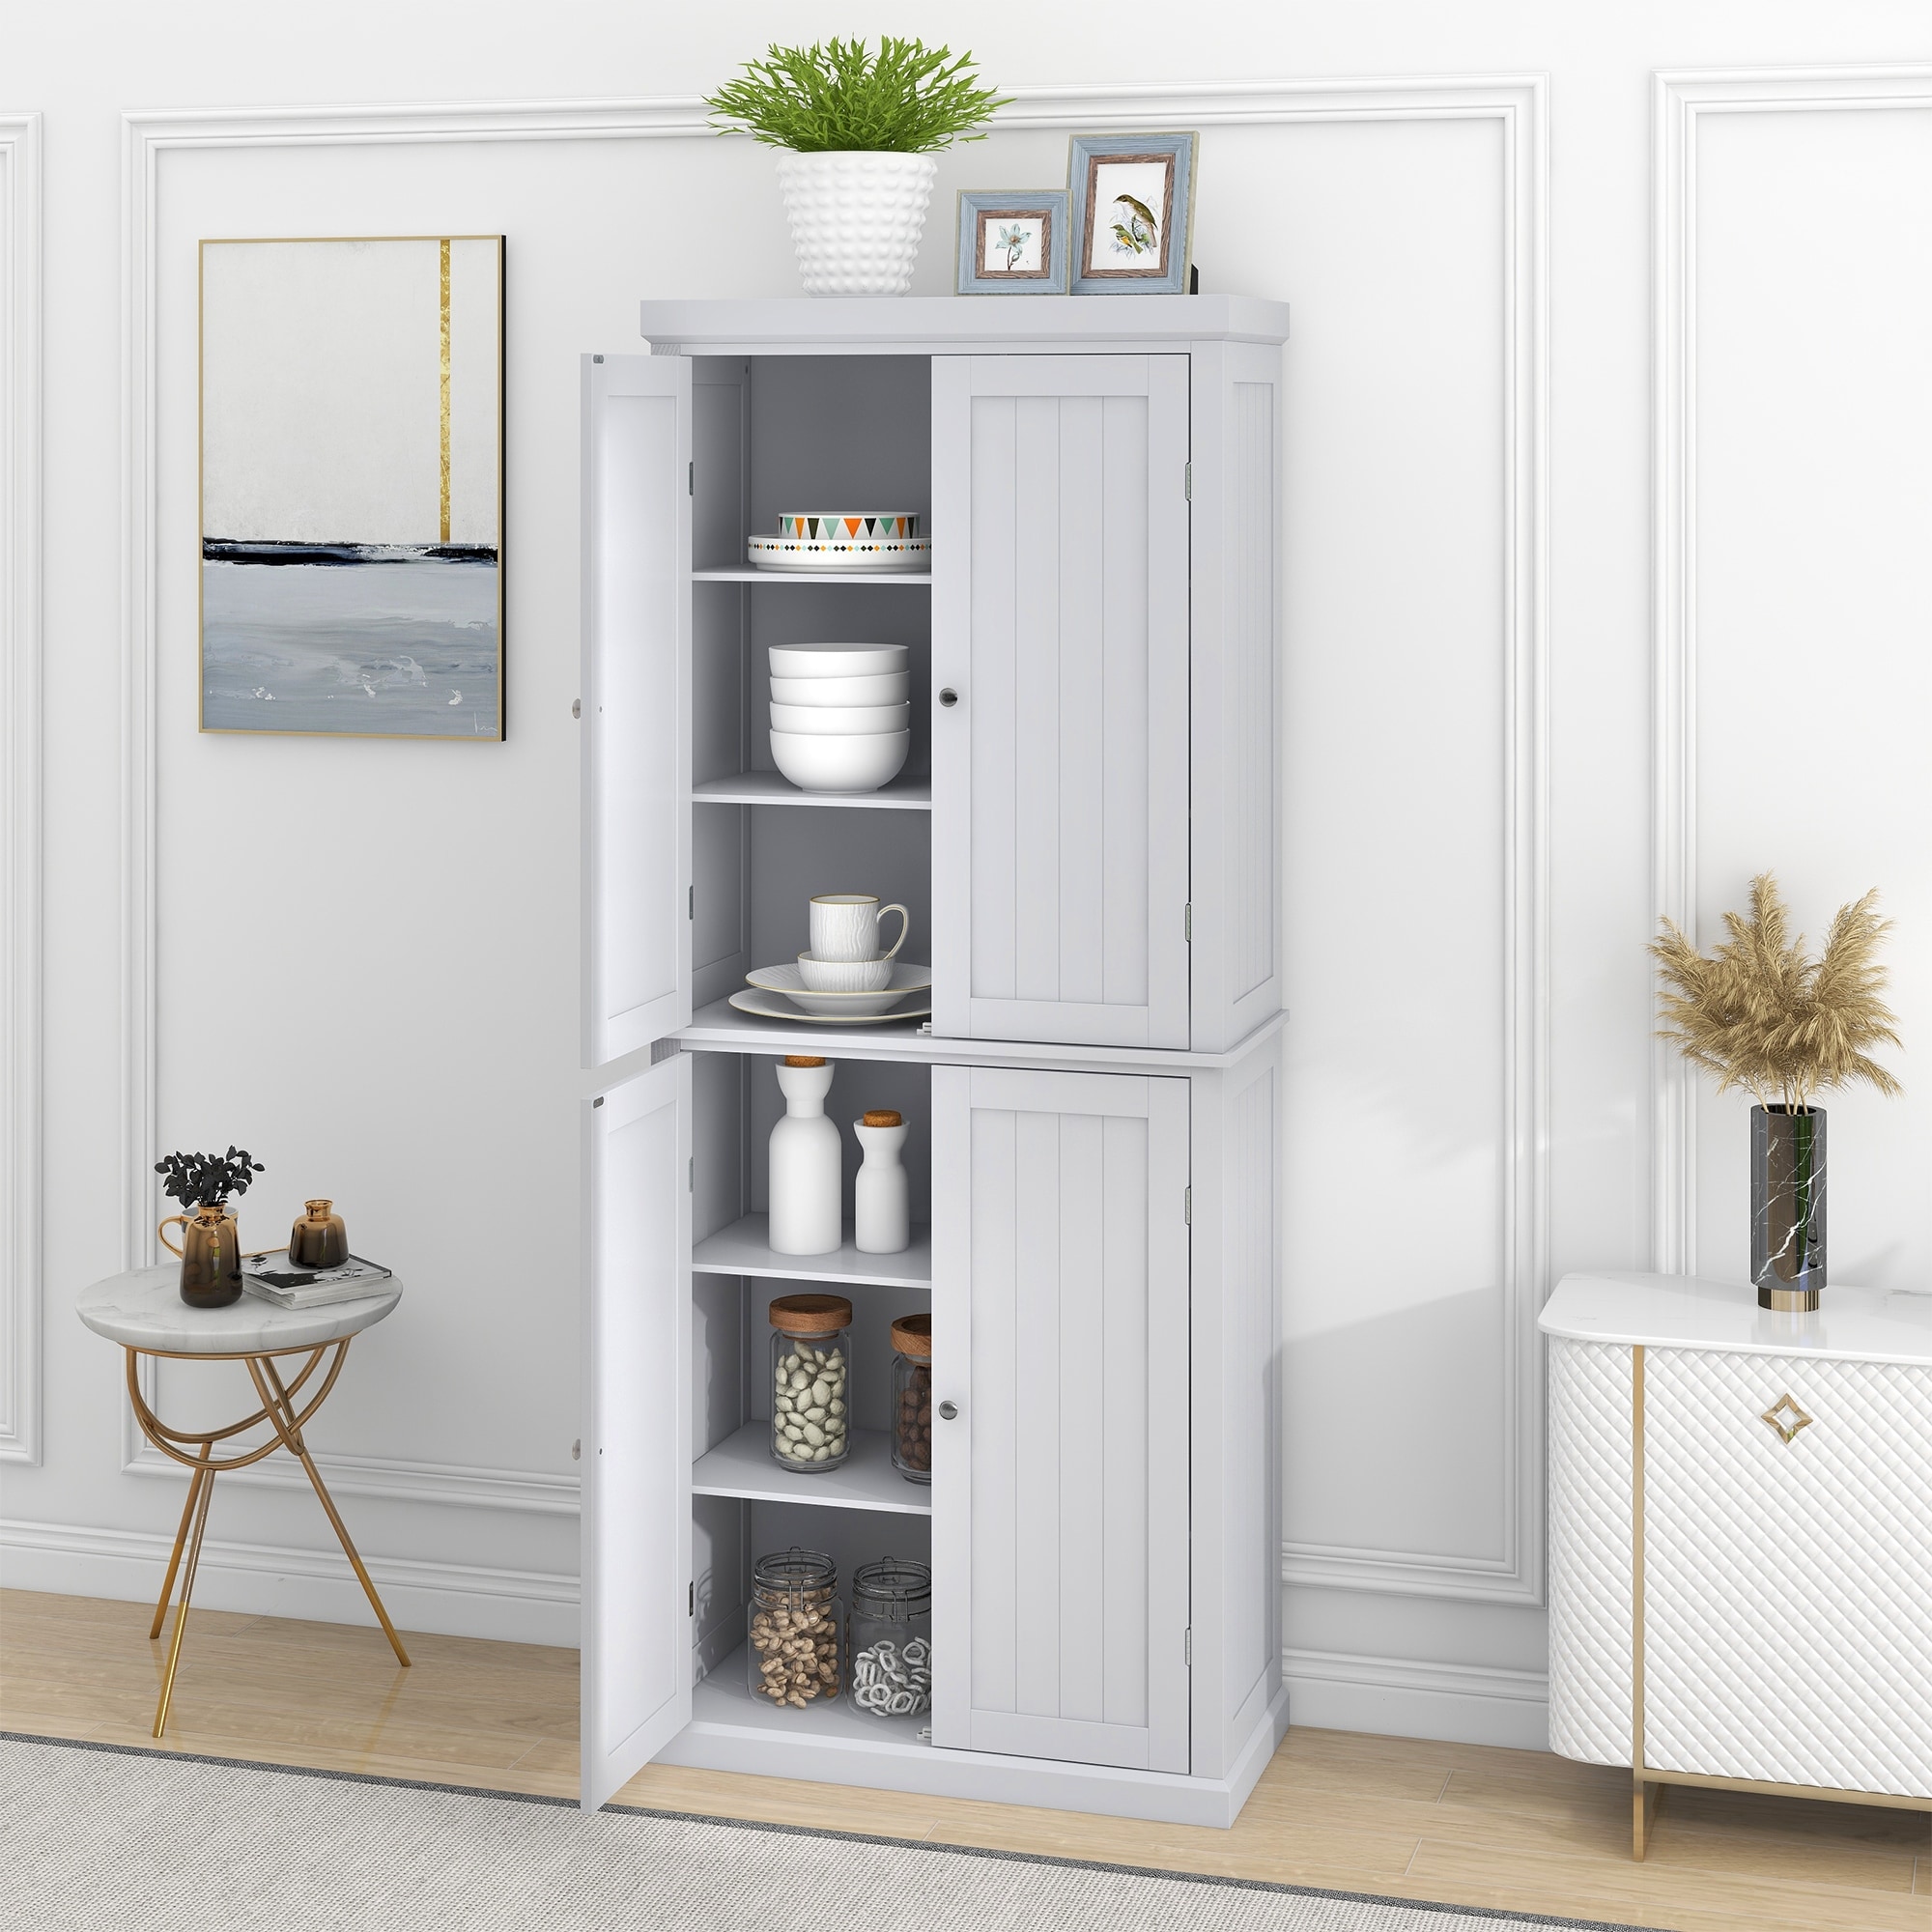 https://ak1.ostkcdn.com/images/products/is/images/direct/cb795b8f0dc8805757020ccec9722d793eeaee3e/Freestanding-Tall-Kitchen-Pantry%2C-72.4%22-Minimalist-Kitchen-Storage-Cabinet-Organizer-with-4-Doors-and-Adjustable-Shelves%2C-White.jpg